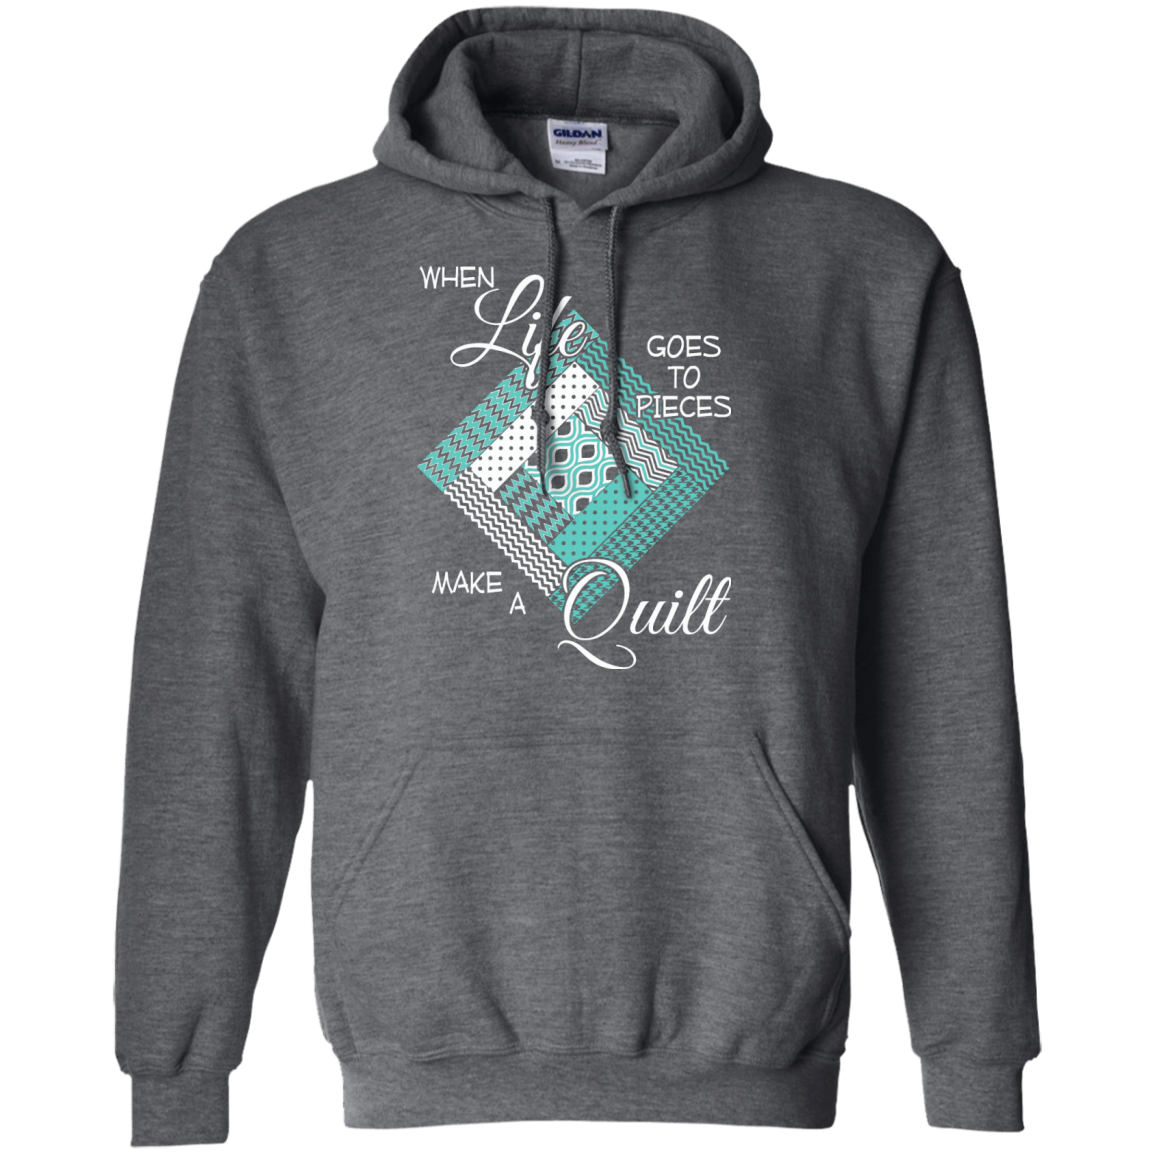 Make a Quilt (turquoise) Pullover Hoodies - Crafter4Life - 4